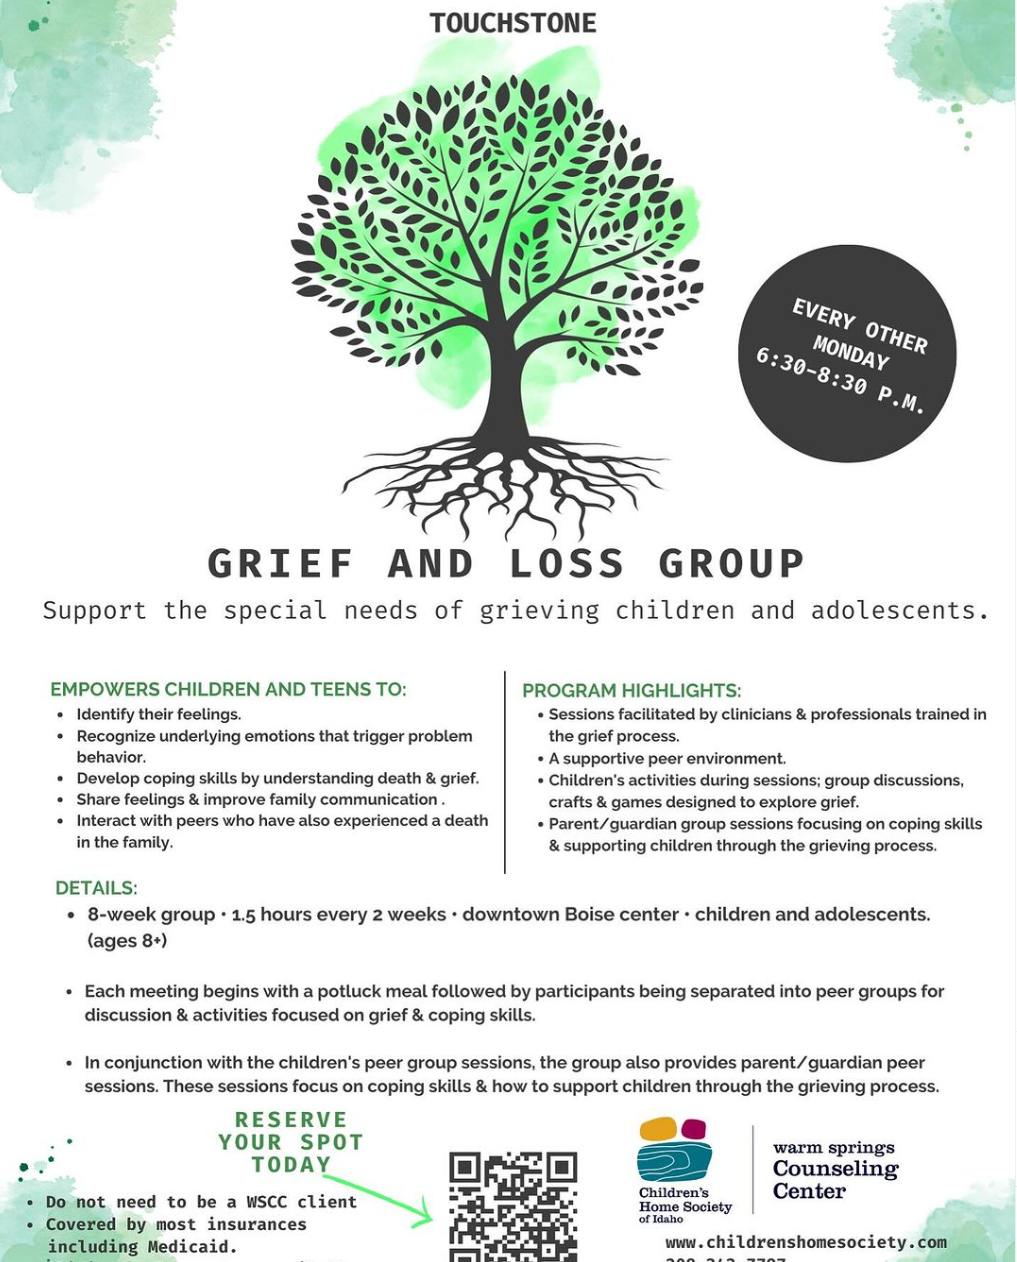 Touchstone: A Free Program for Grieving Children & Adolescents